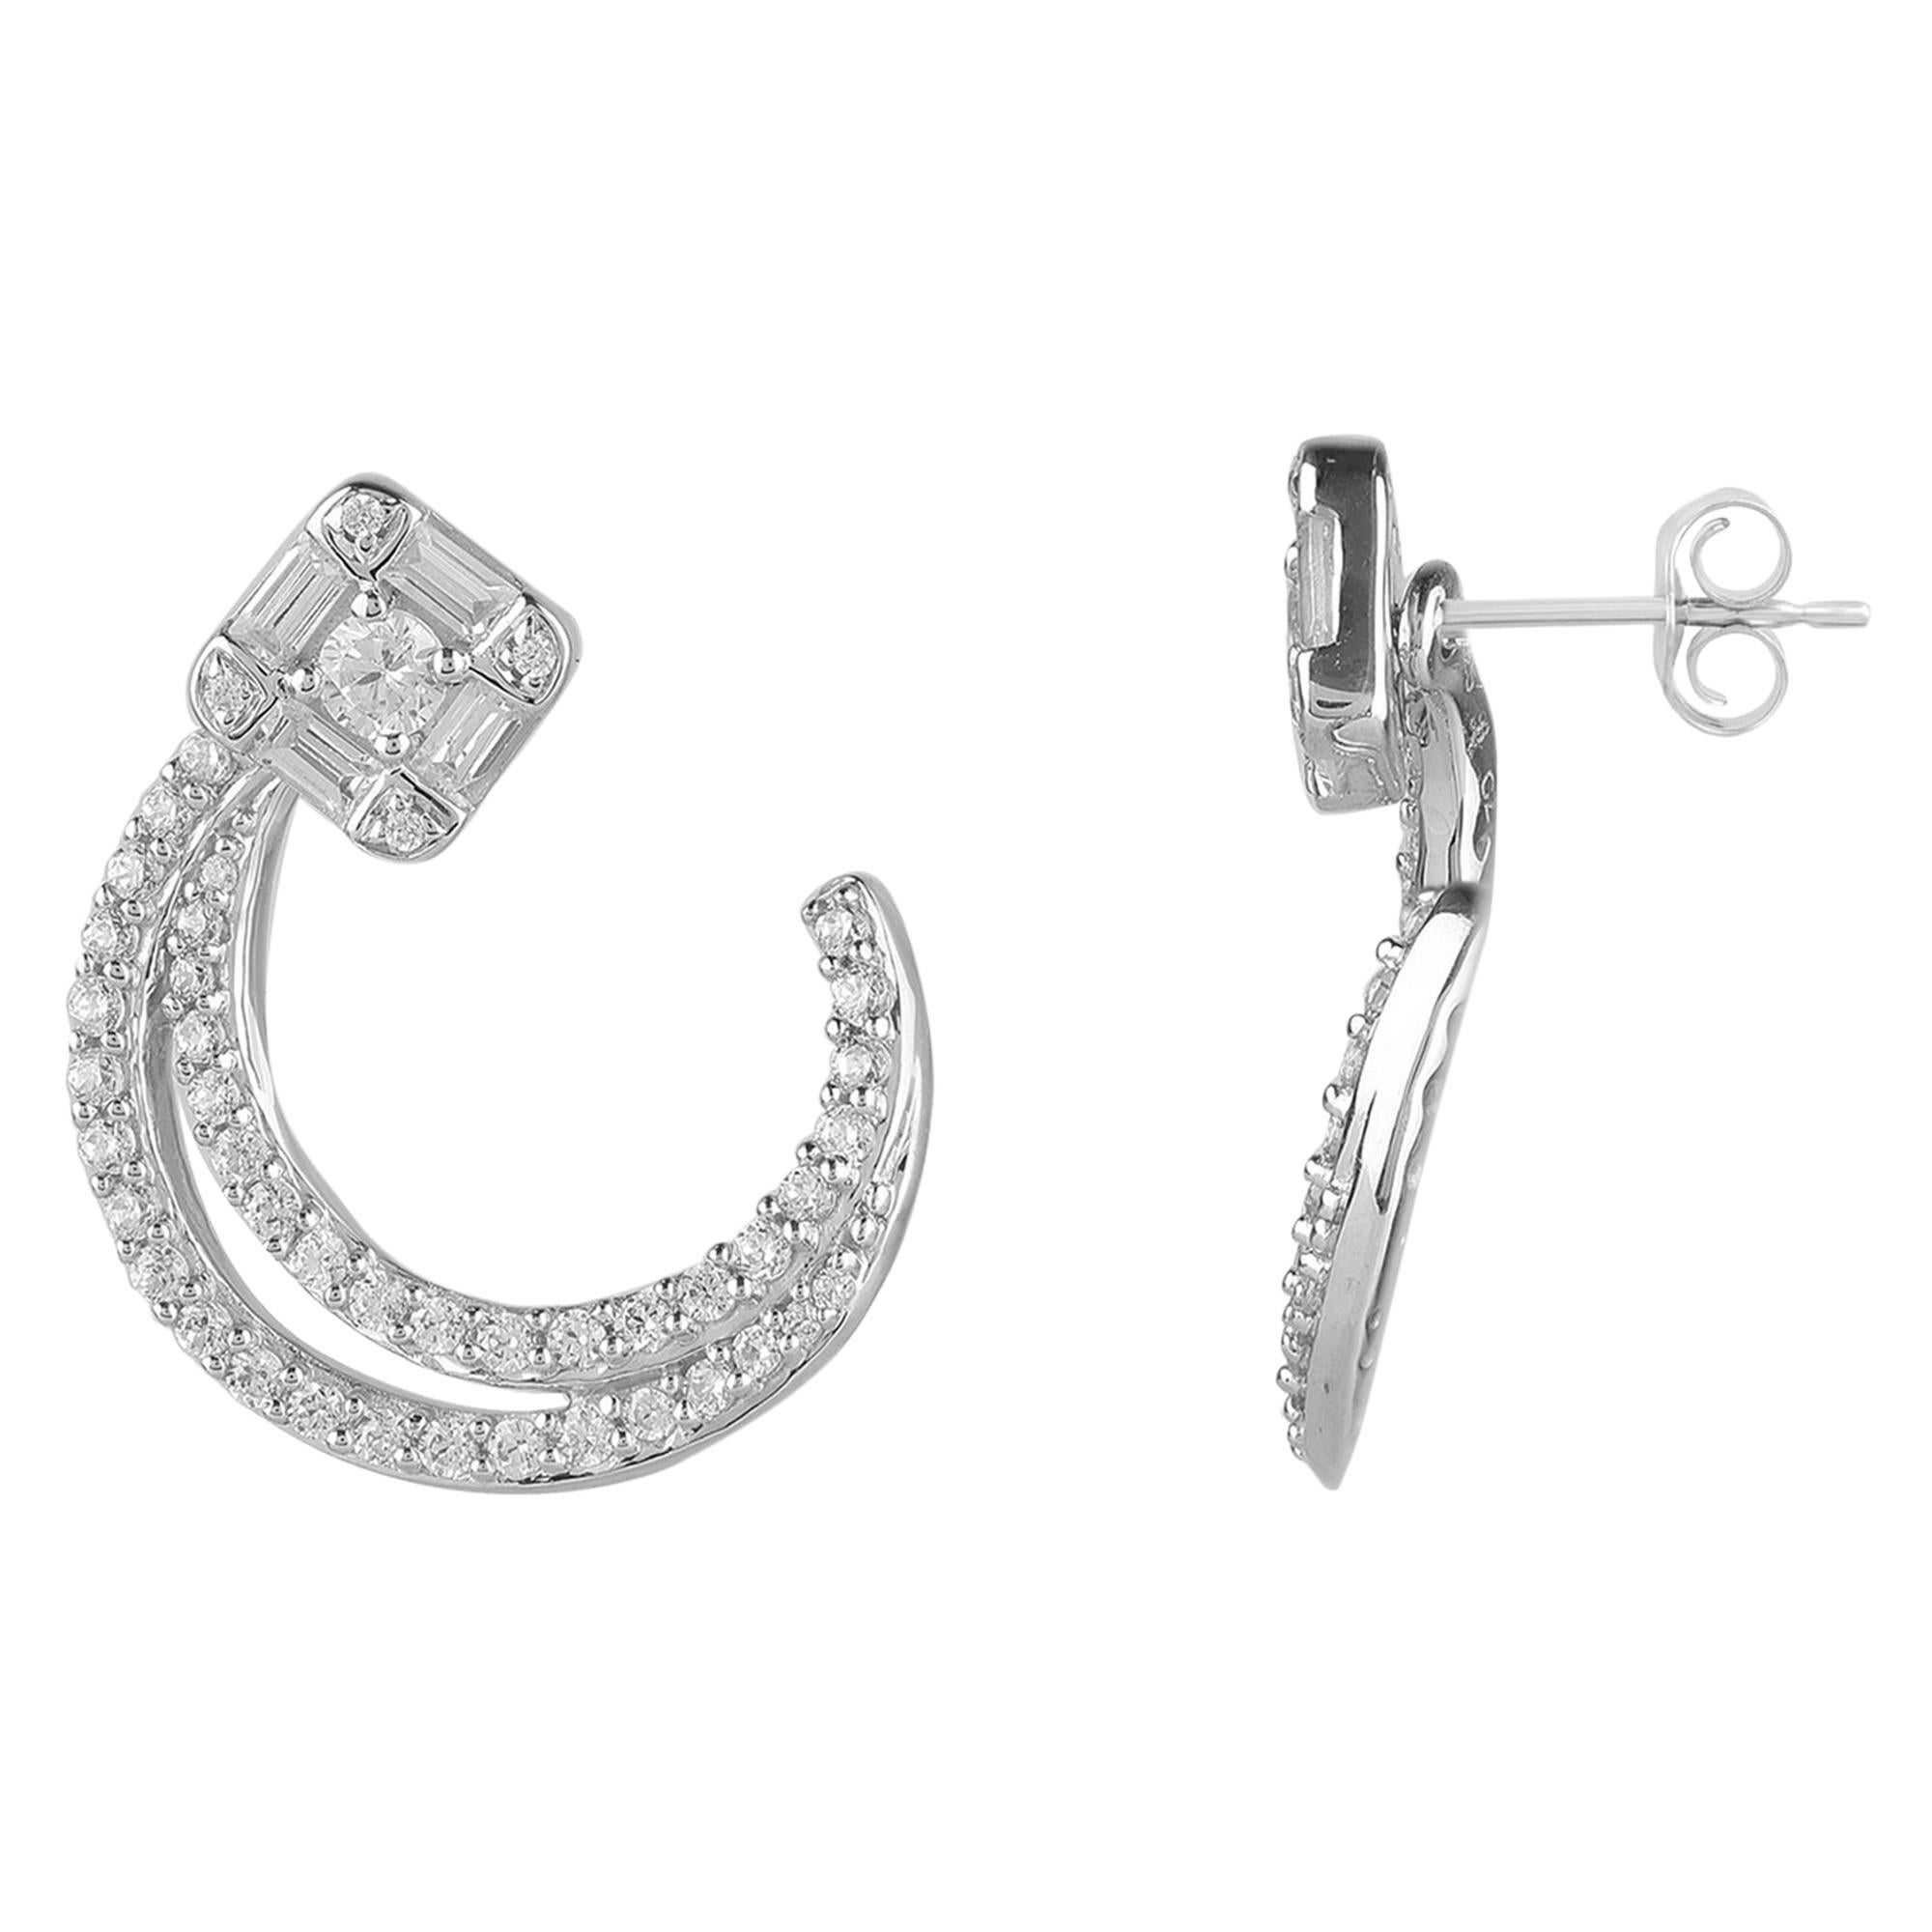 TJD 0.75 Carat Round and Baguette Diamond 14K White Gold C-Shaped Stud Earrings